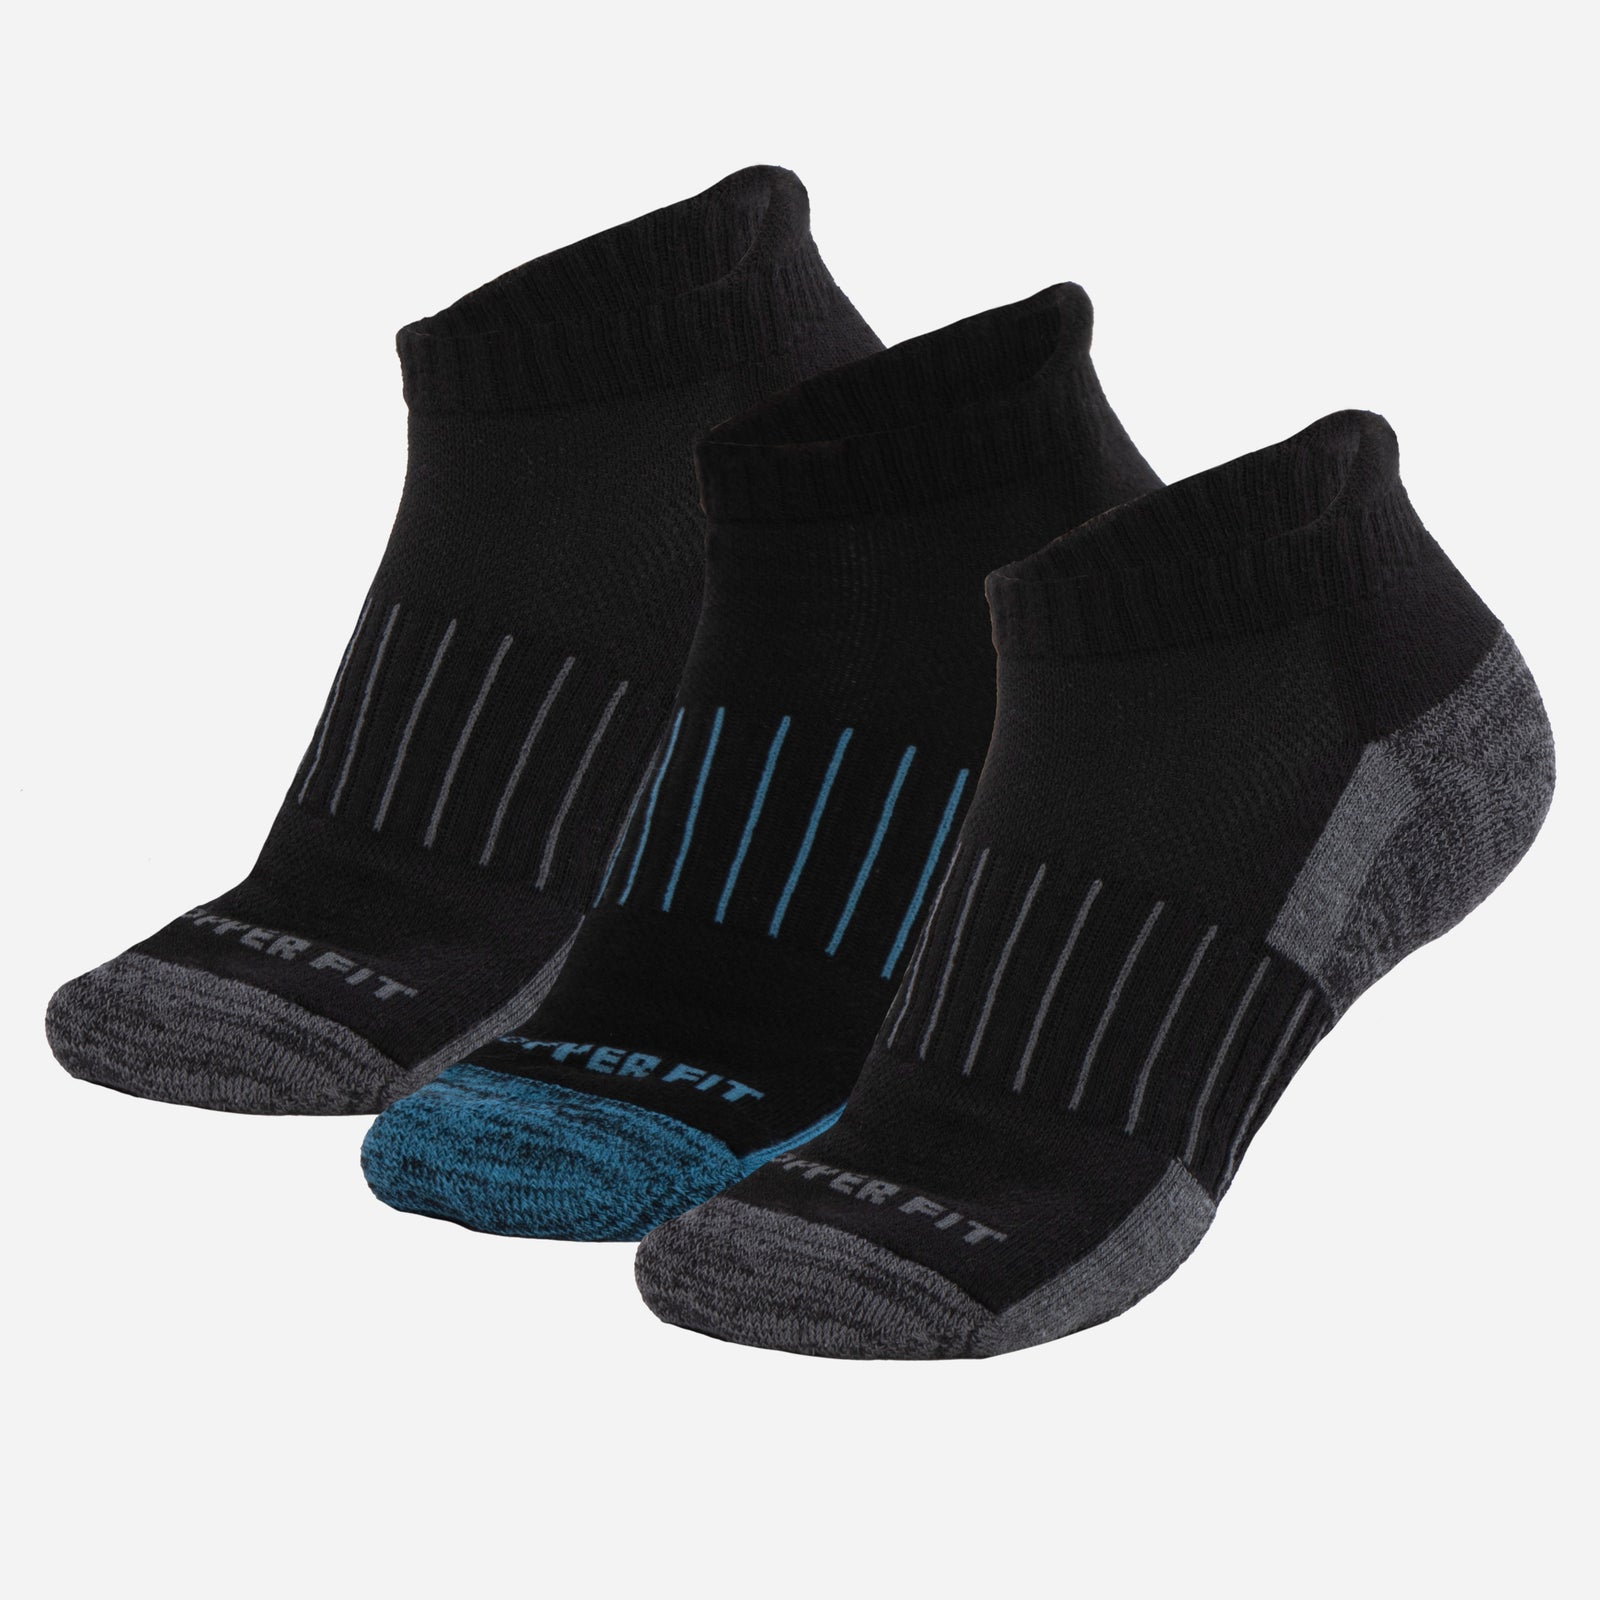 P00084 - Modetro Compression Socks with Arch Support – Blue Gator